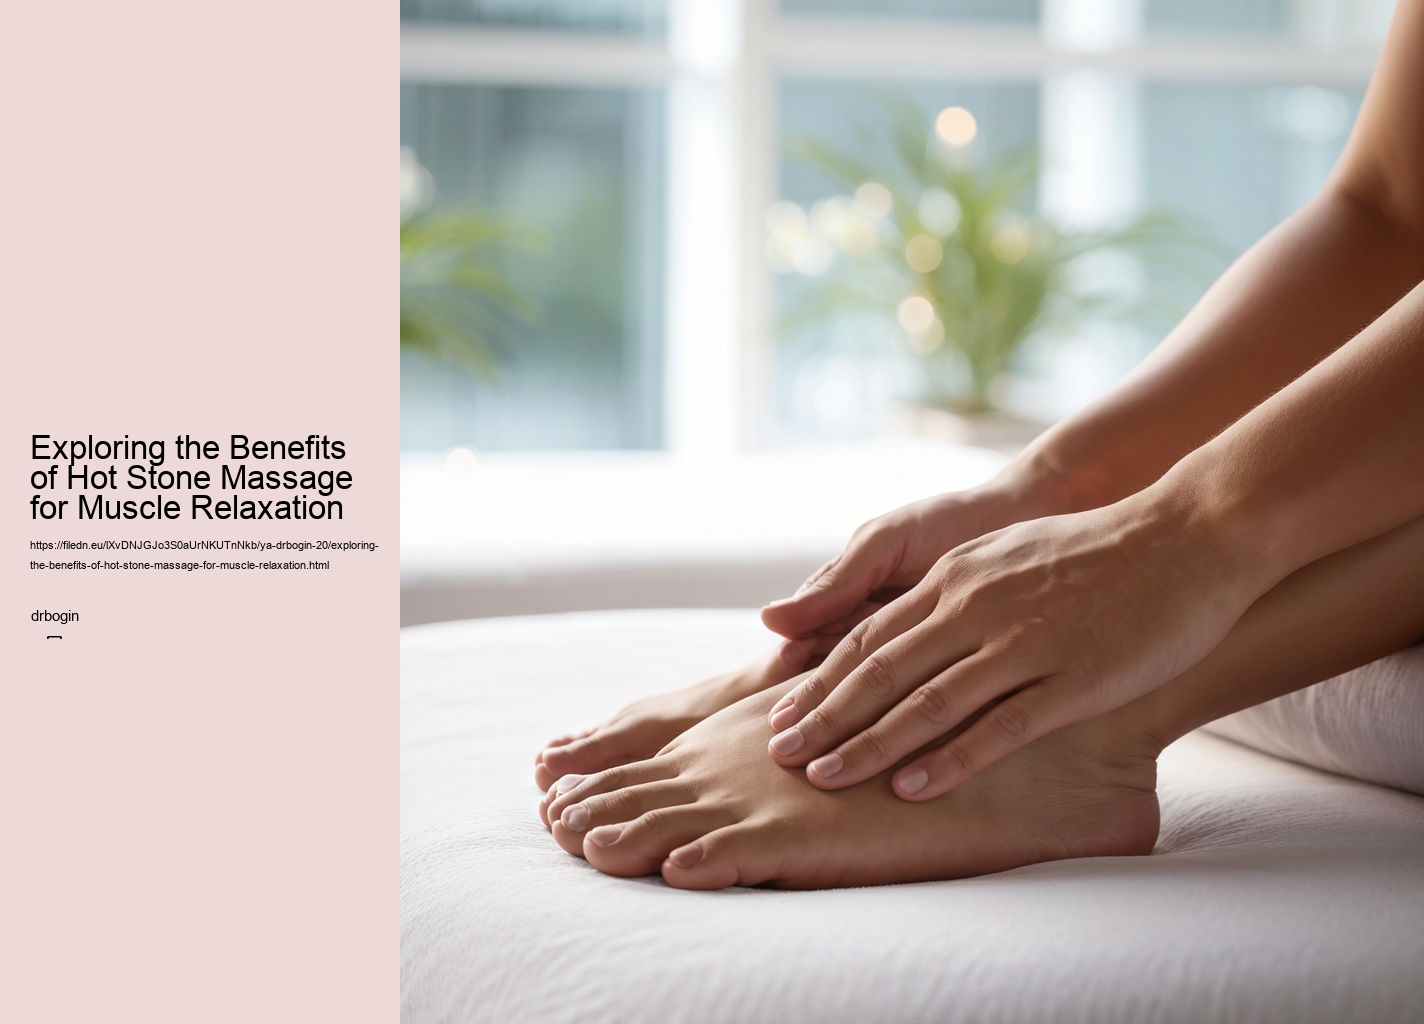 Exploring the Benefits of Hot Stone Massage for Muscle Relaxation